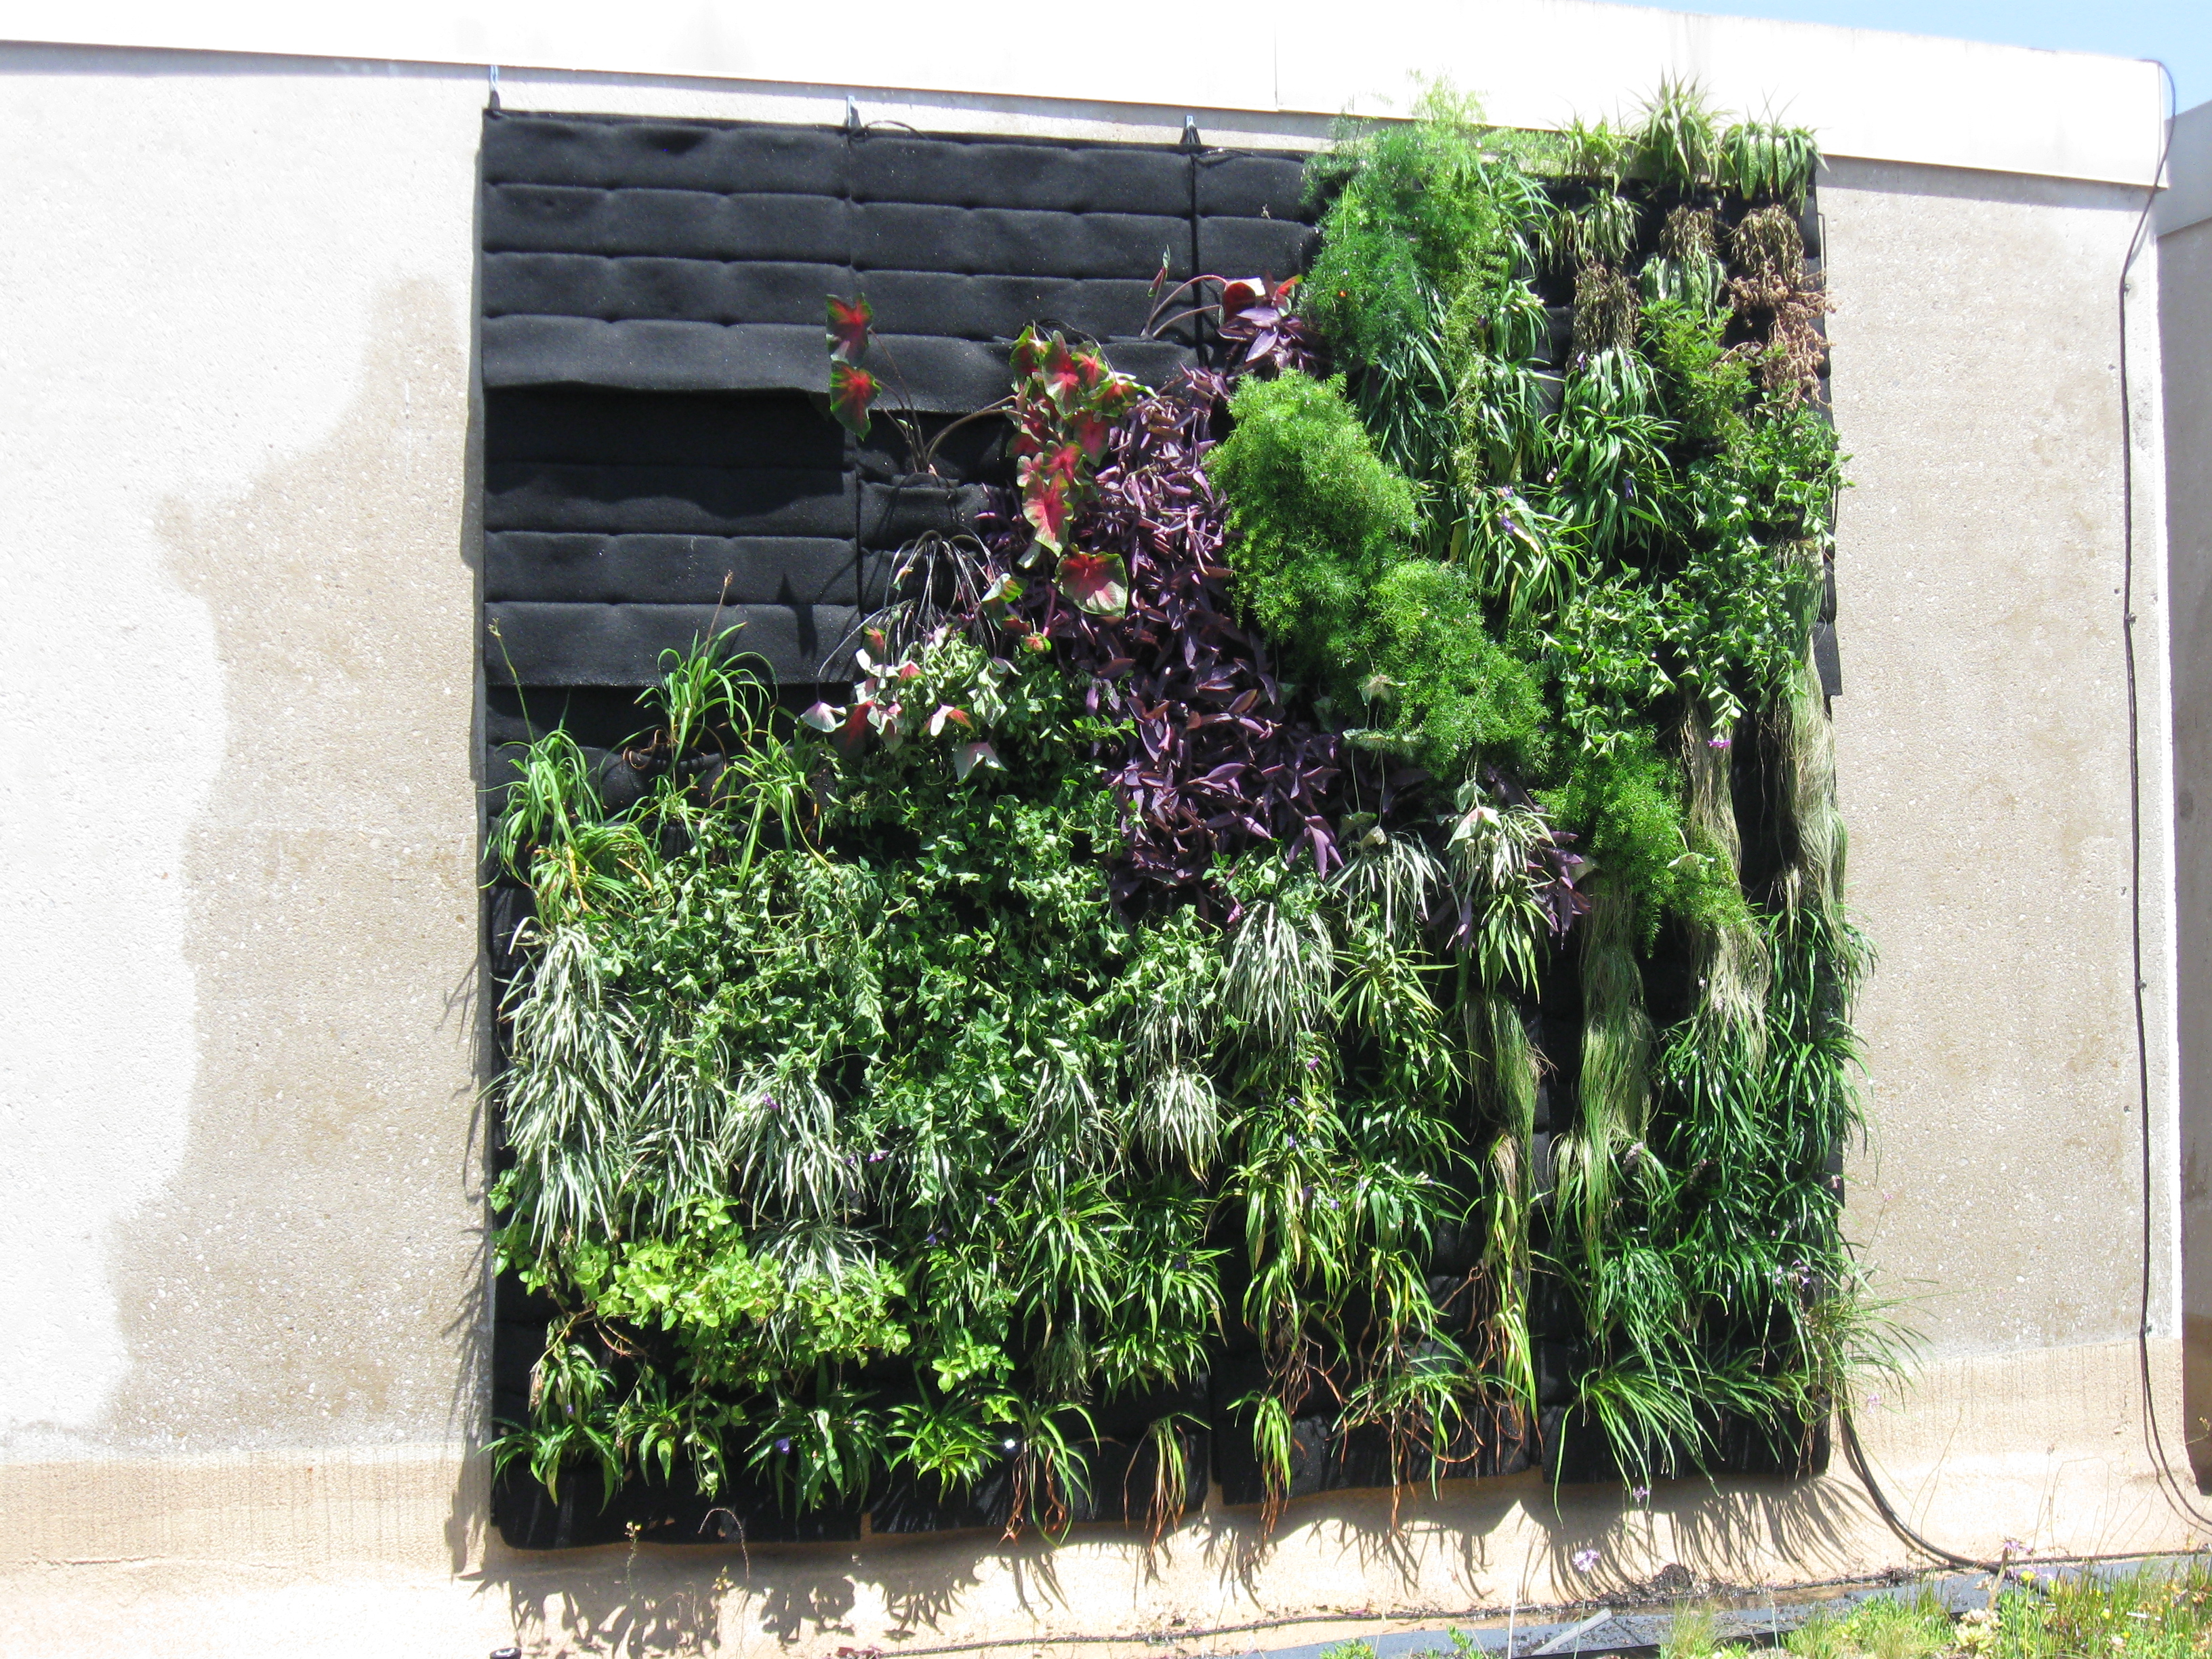 Living Wall | Texas A&M's Green Roof Project